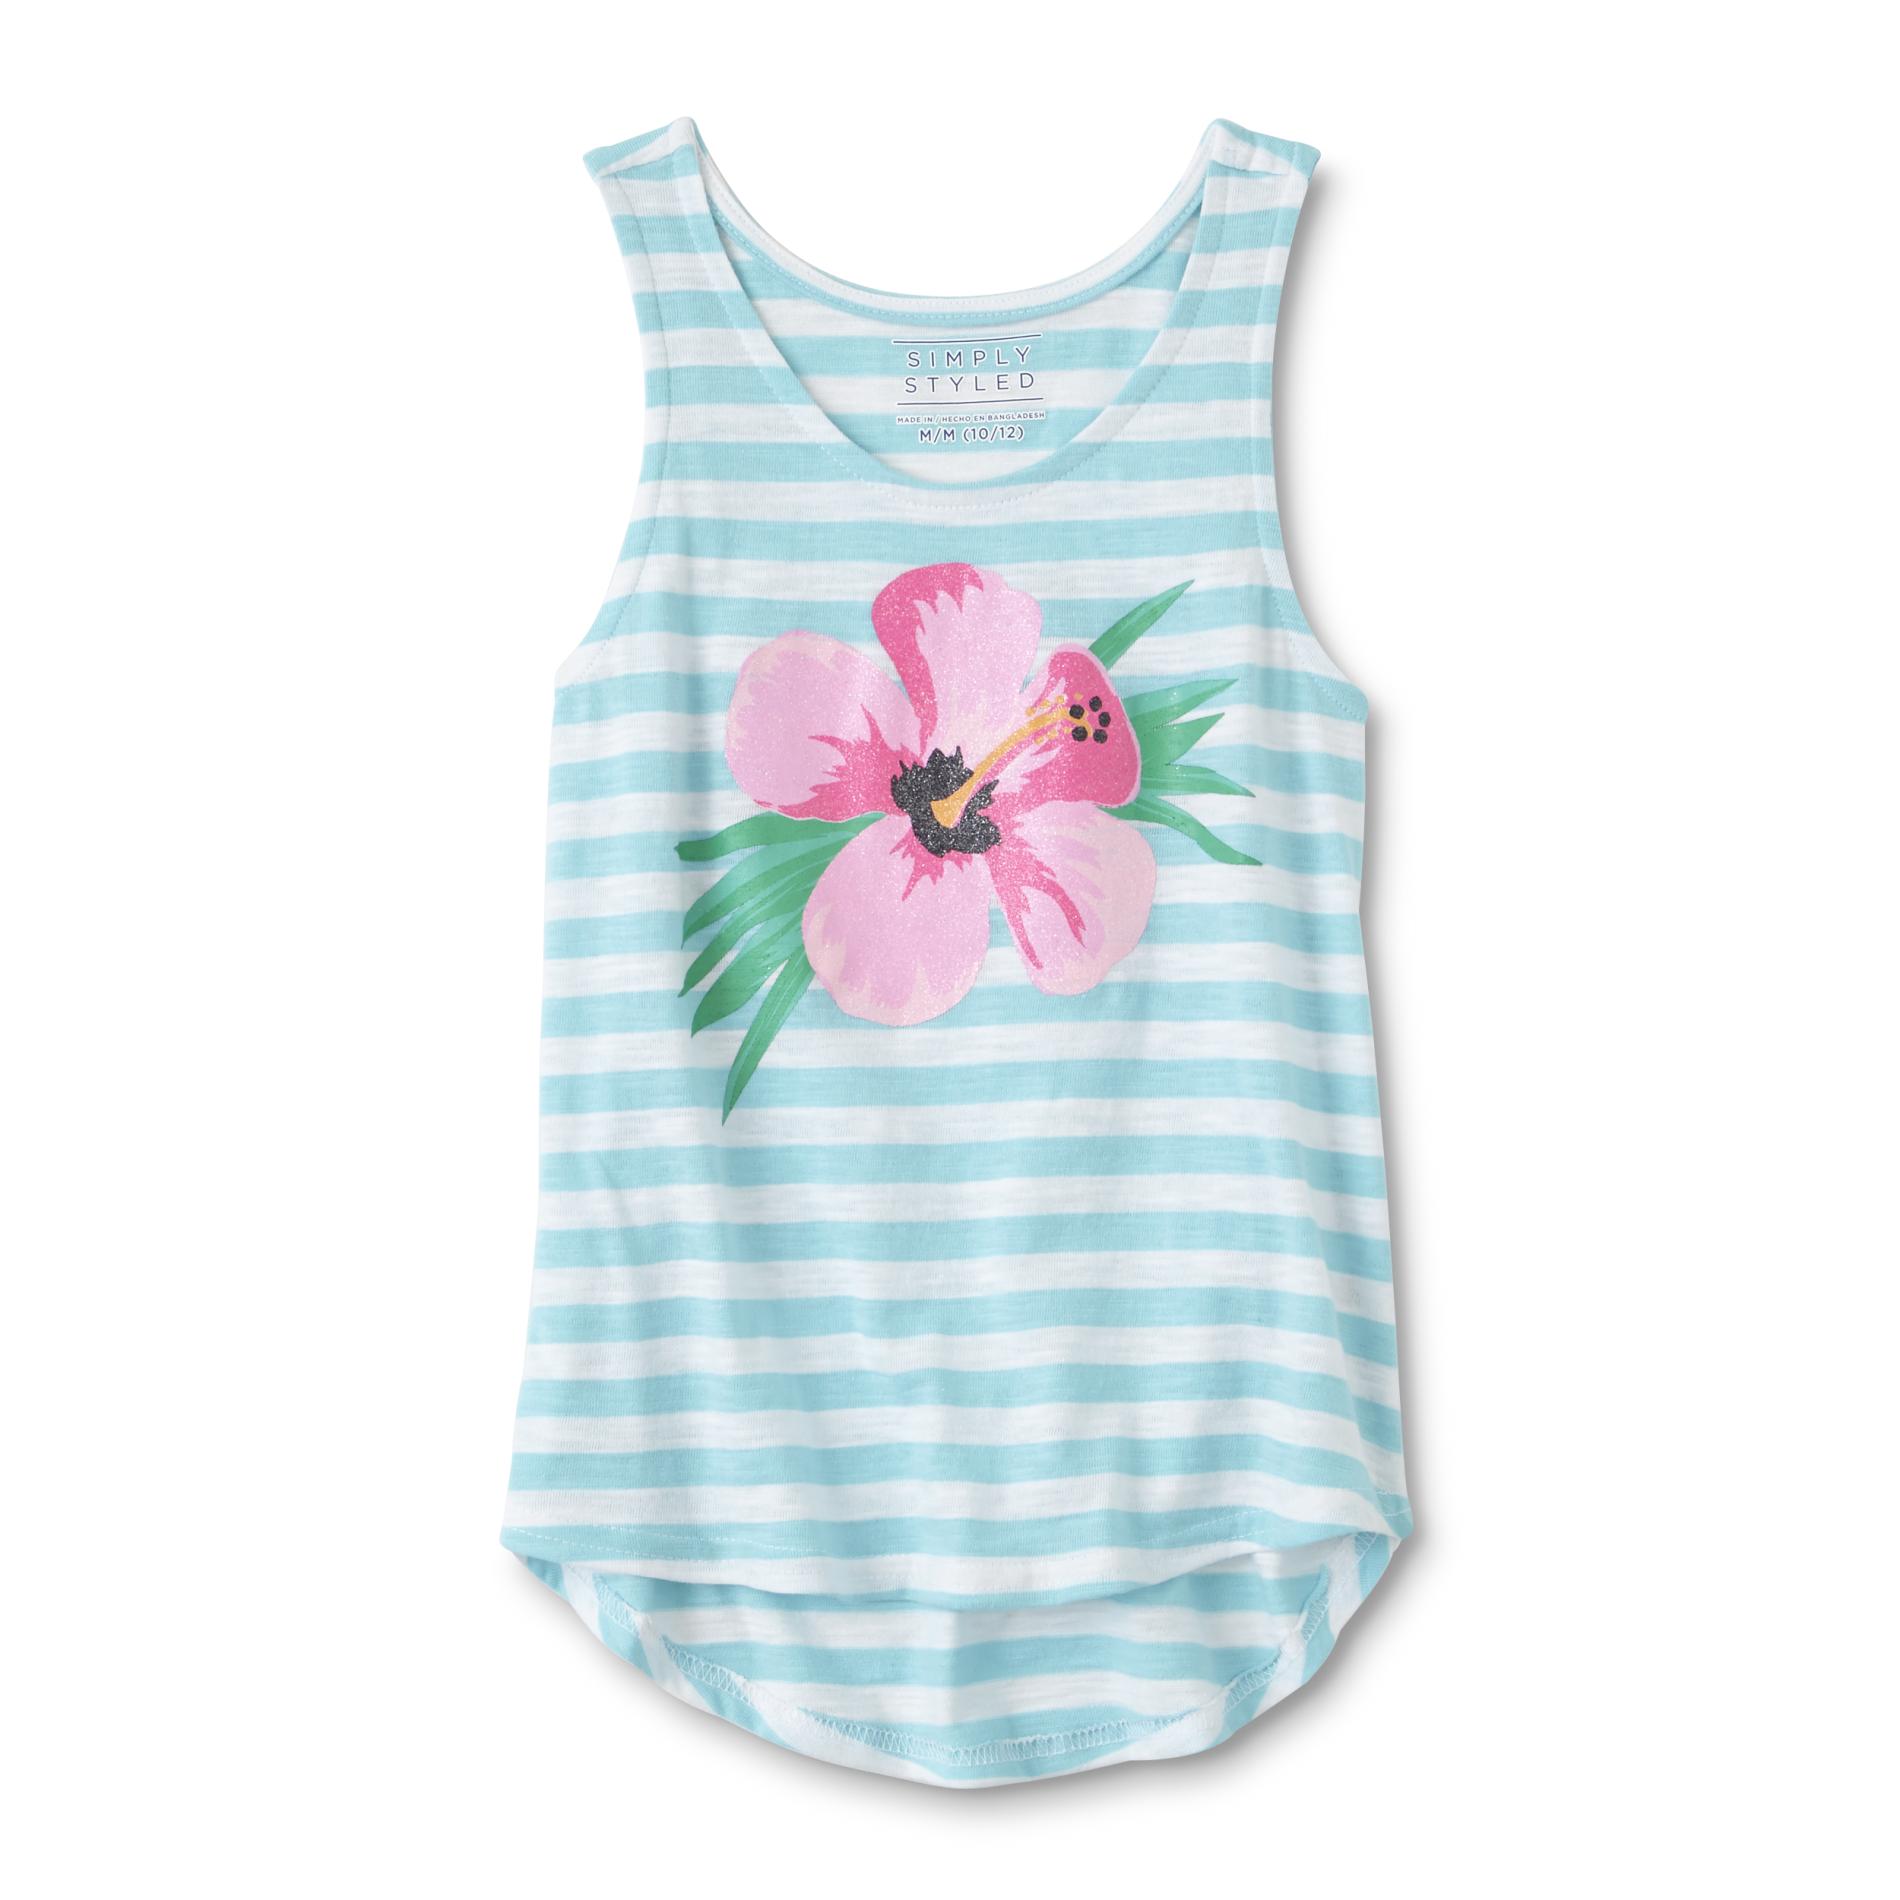 Simply Styled Girls' Graphic Tank Top - Striped & Tropical Flower